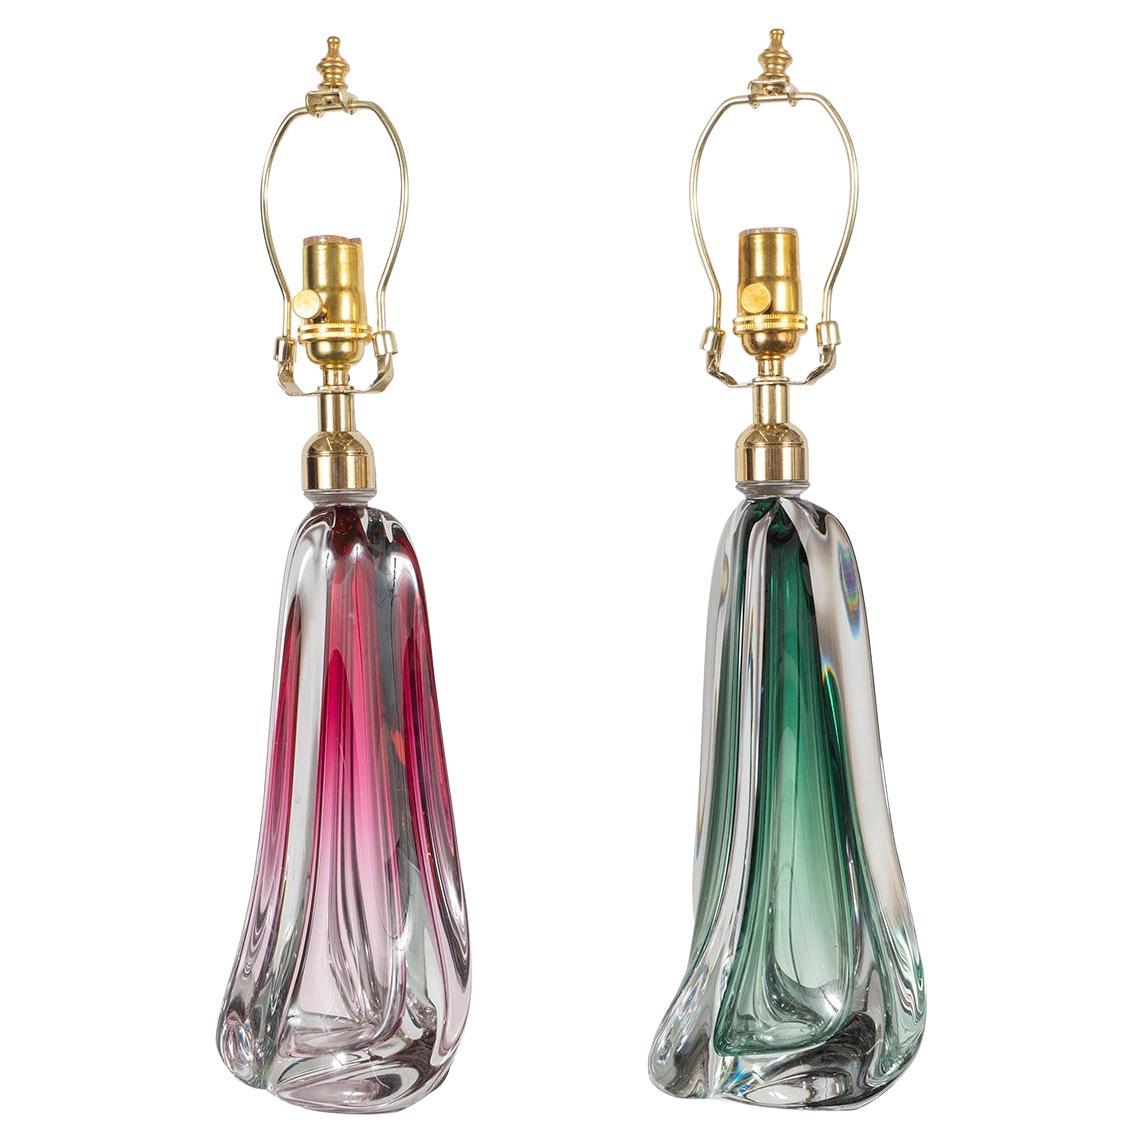 Pair of Amorphic Sommerso Murano Glass Lamps